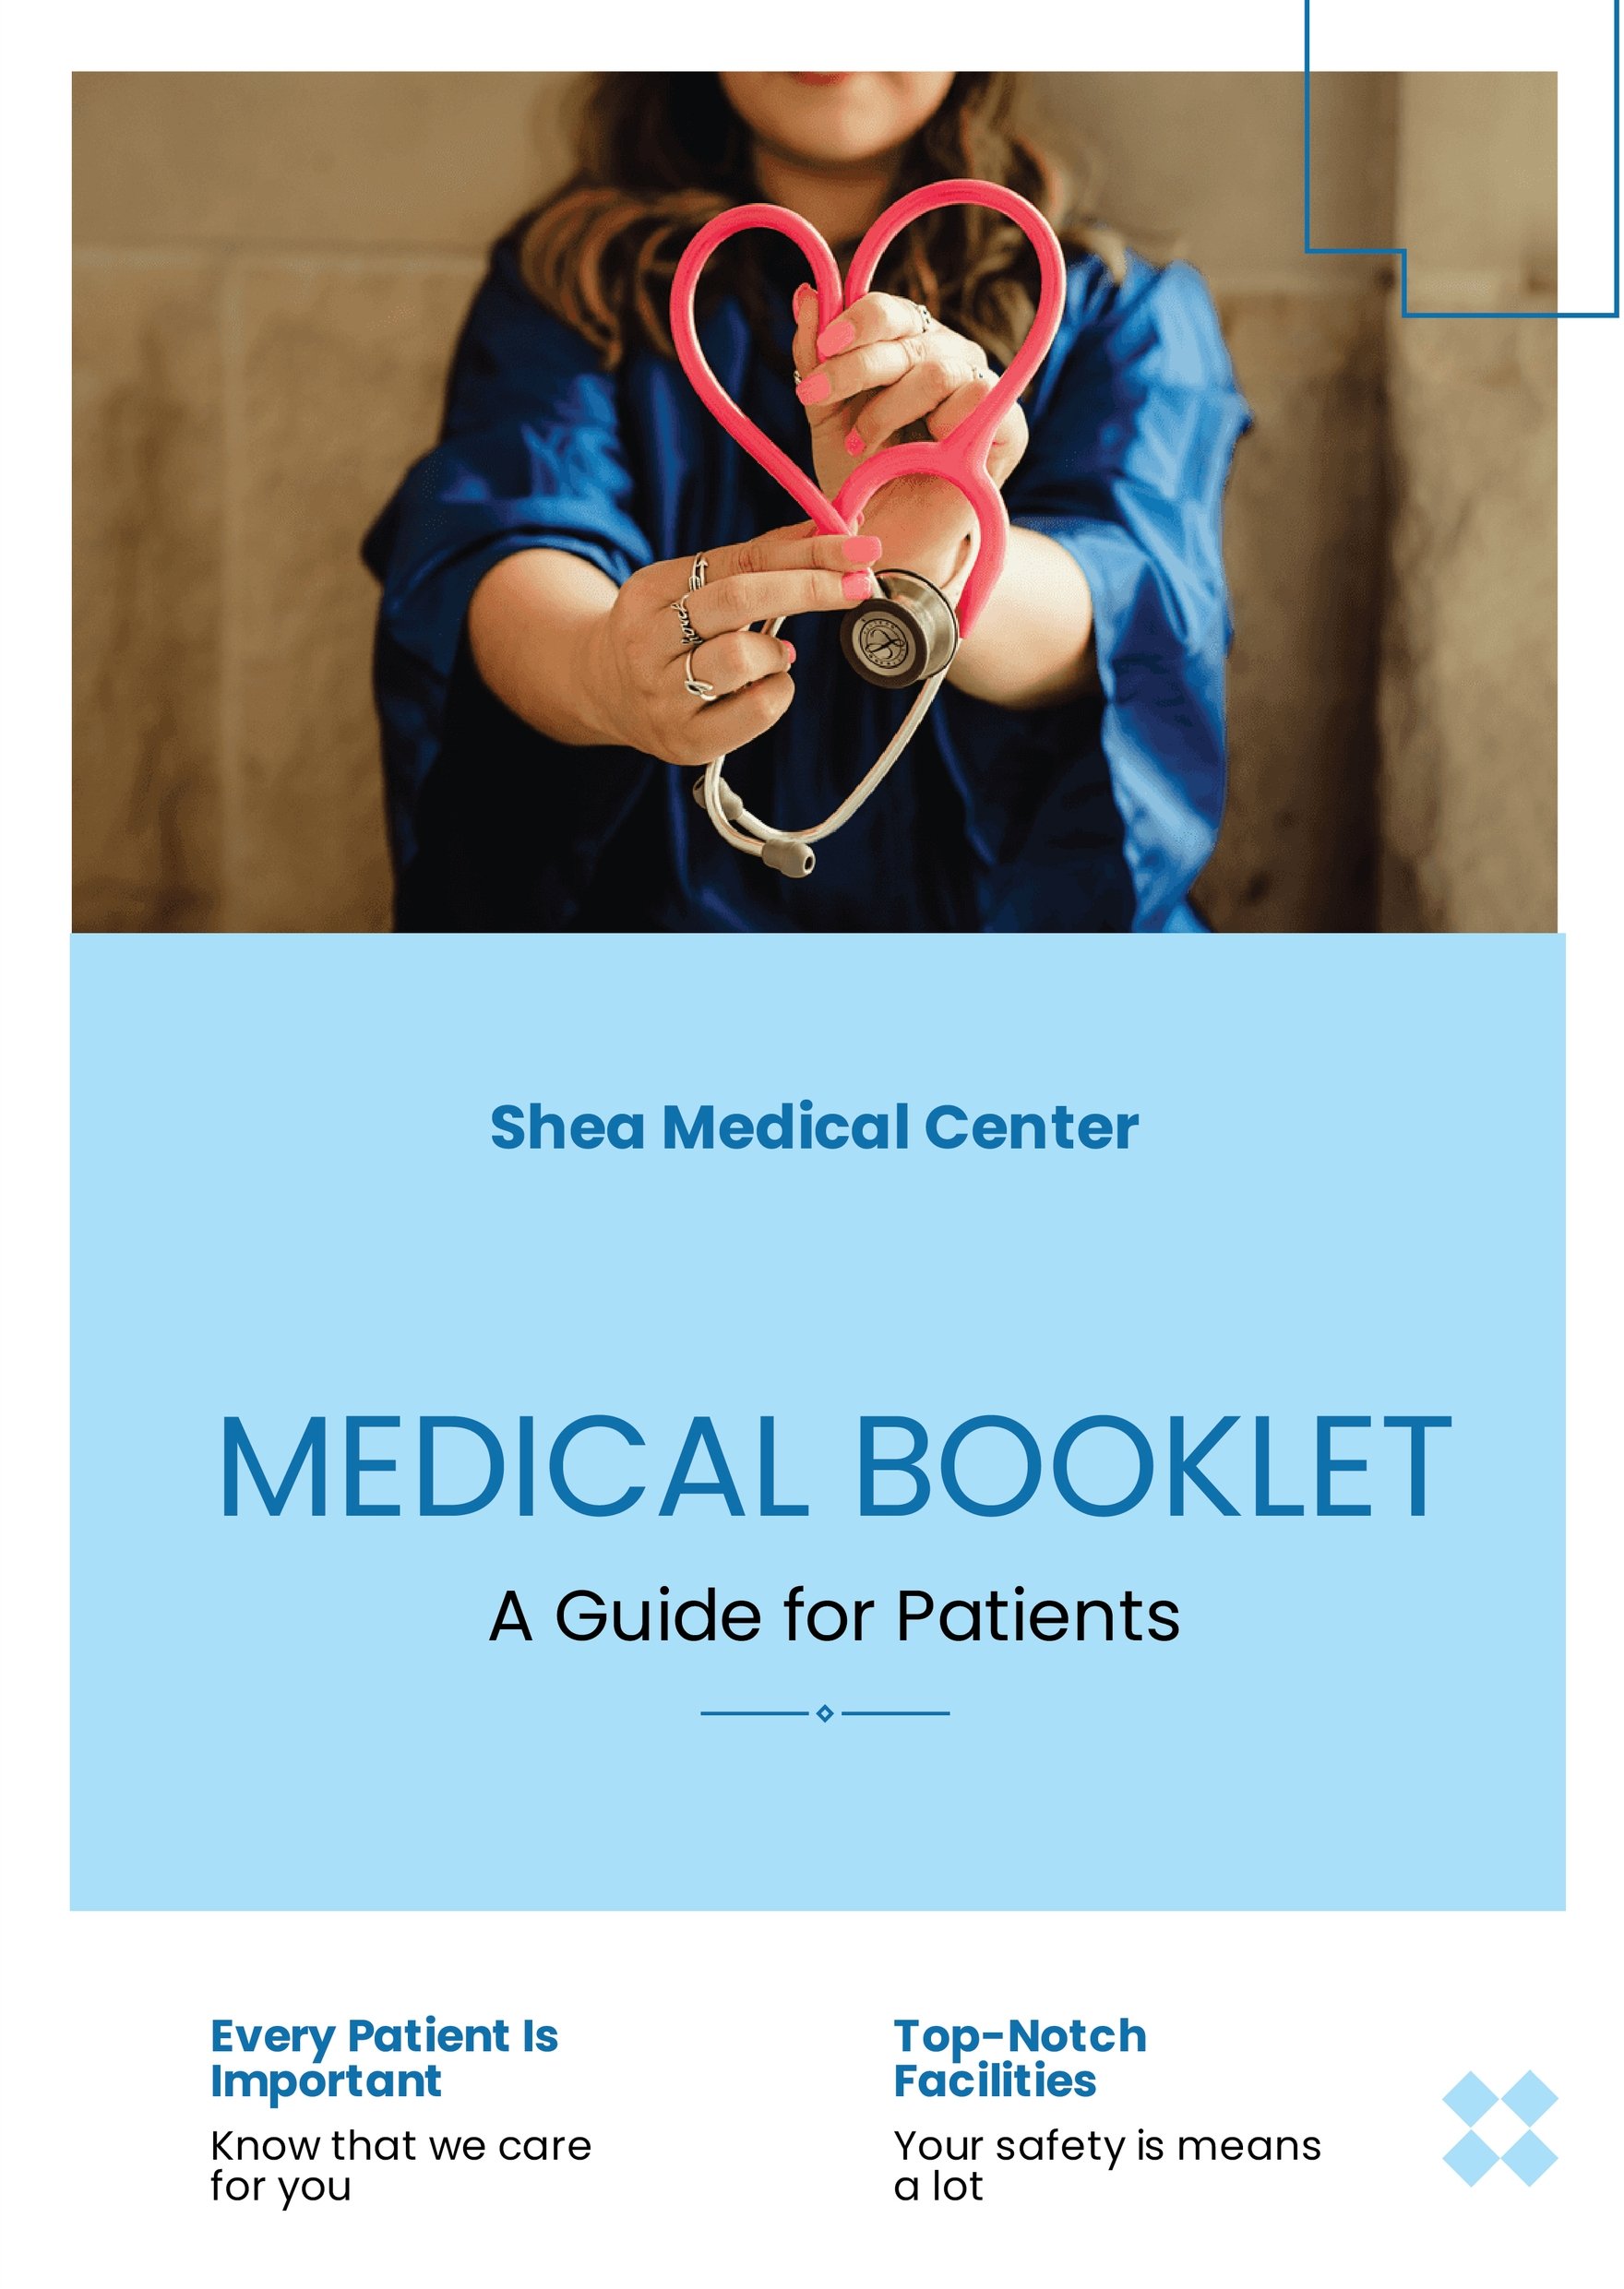 Medical Booklet Template in Word, Google Docs, Illustrator, PSD, Apple Pages, Publisher